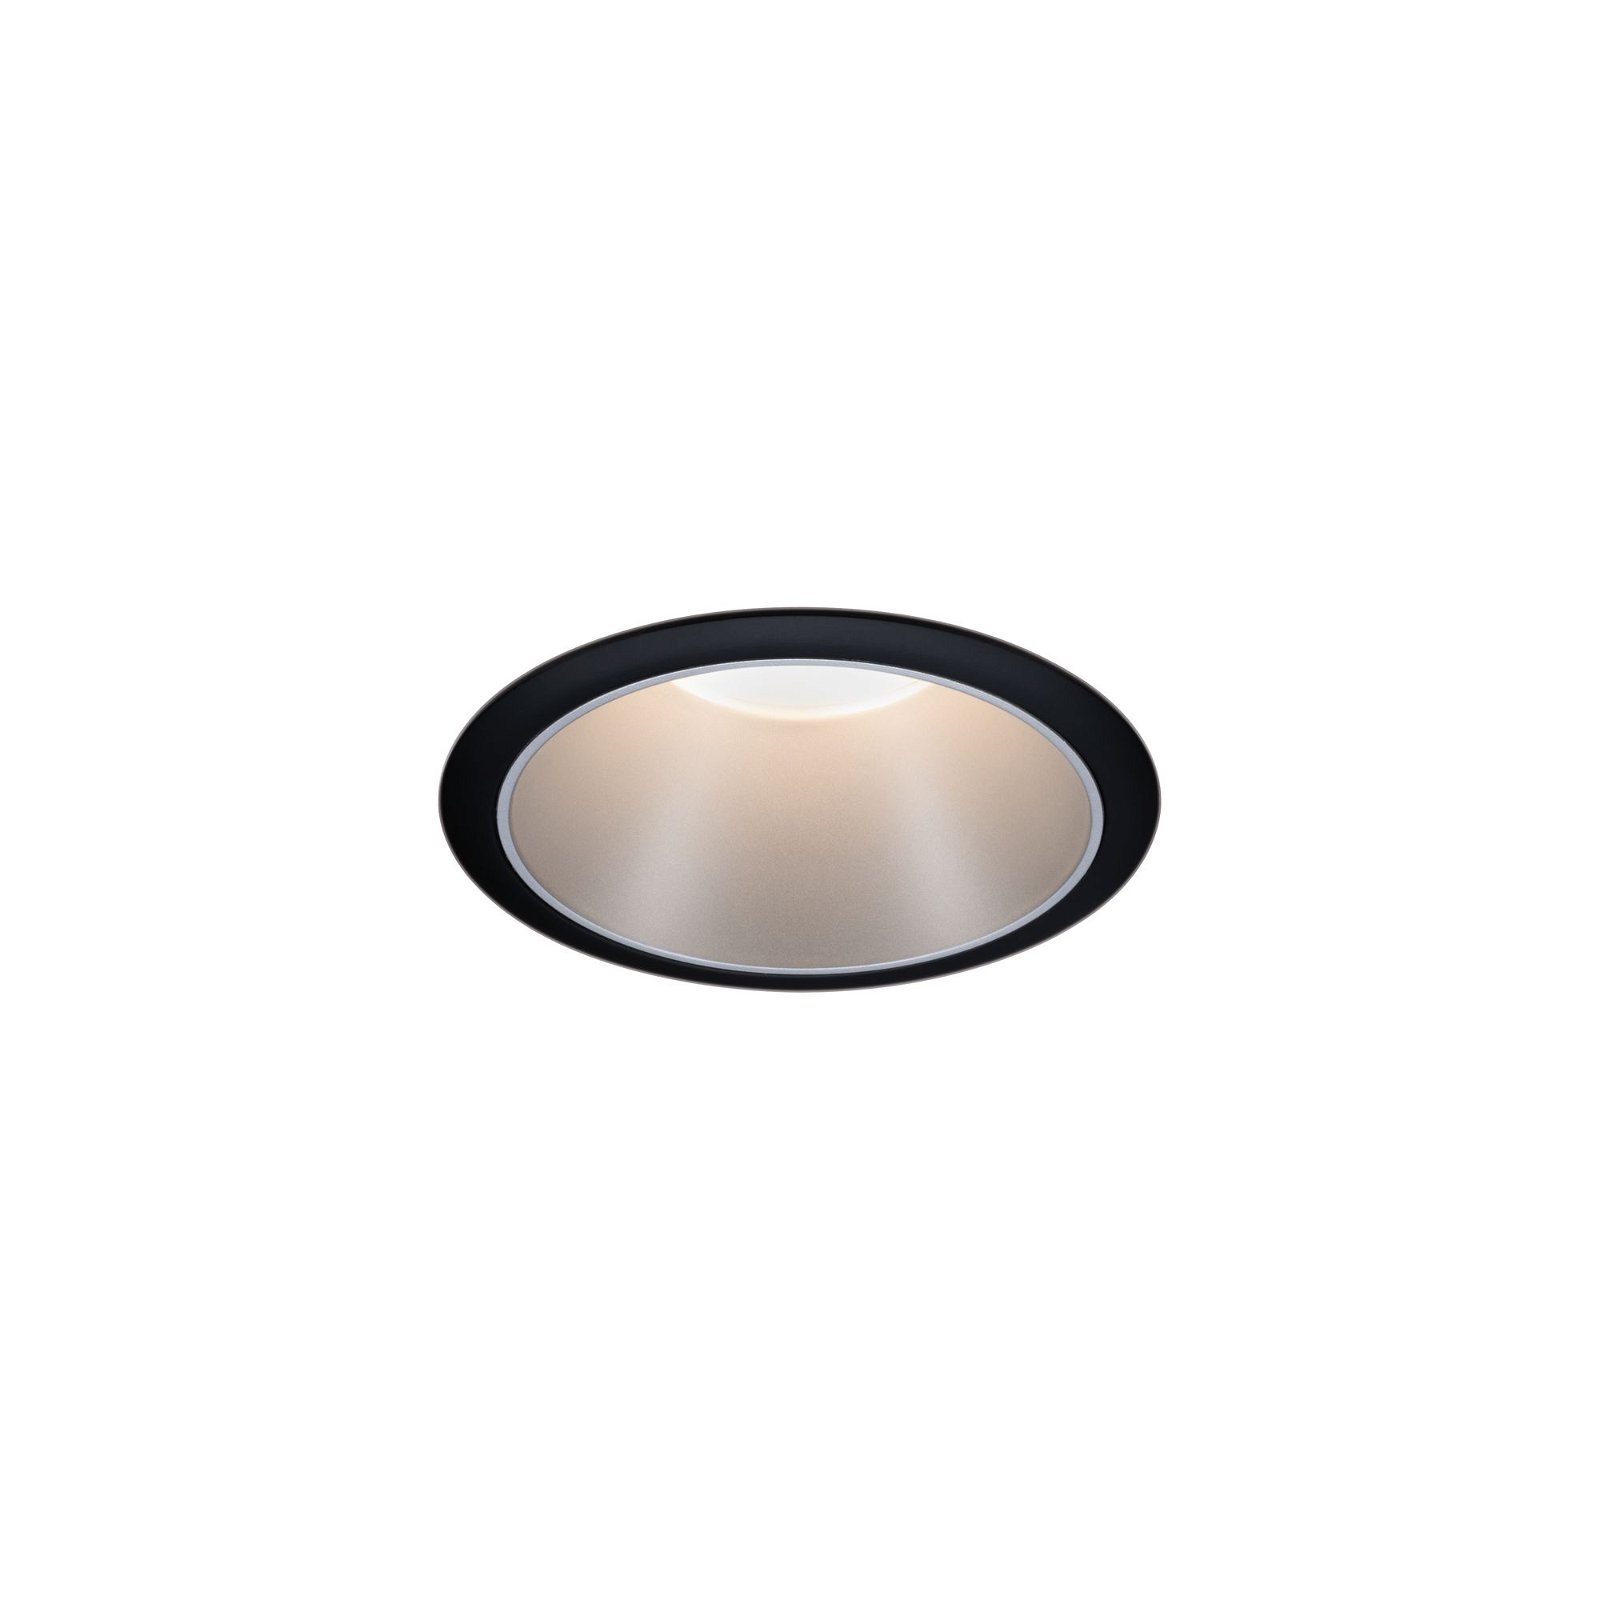 LED Recessed luminaire 3-Step-Dim Cole Coin Basic Set IP44 round 88mm Coin 3x6W 3x470lm 230V dimmable 2700K Black/Silver